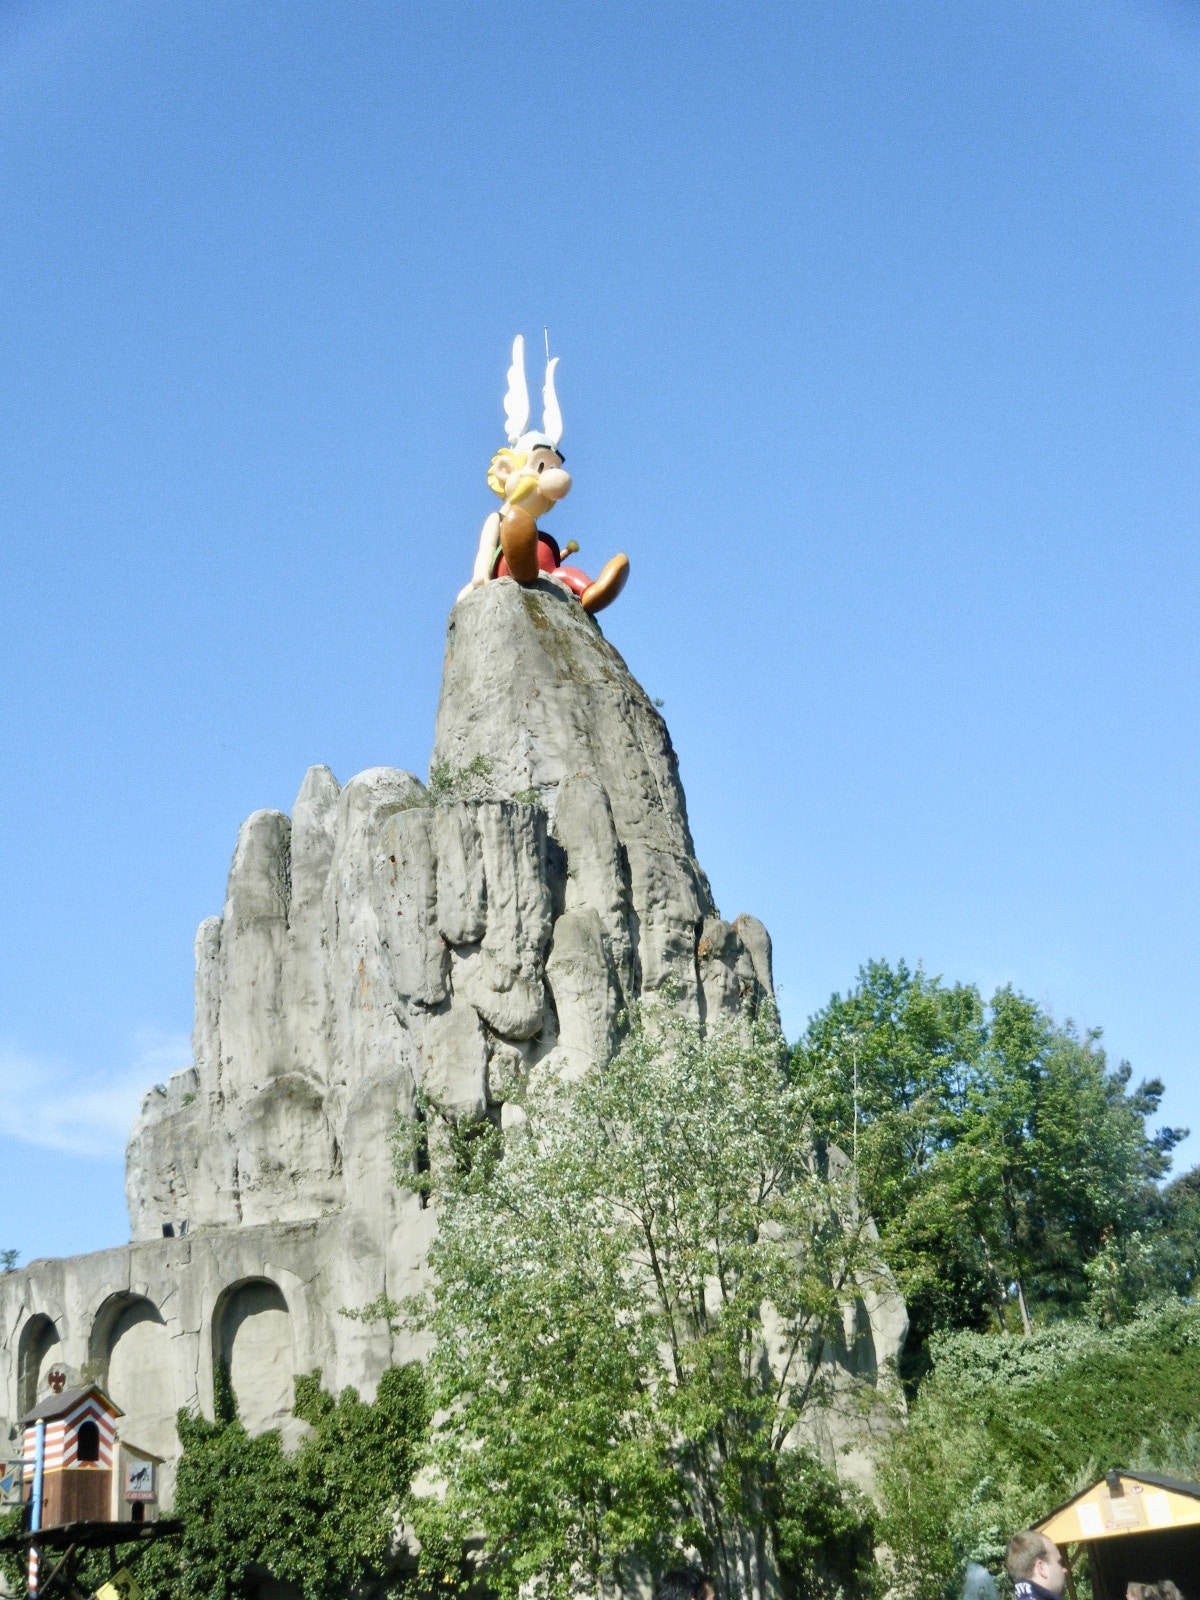 Read more about the article Visit Parc Asterix theme park: Guide to the French alternative to Disney